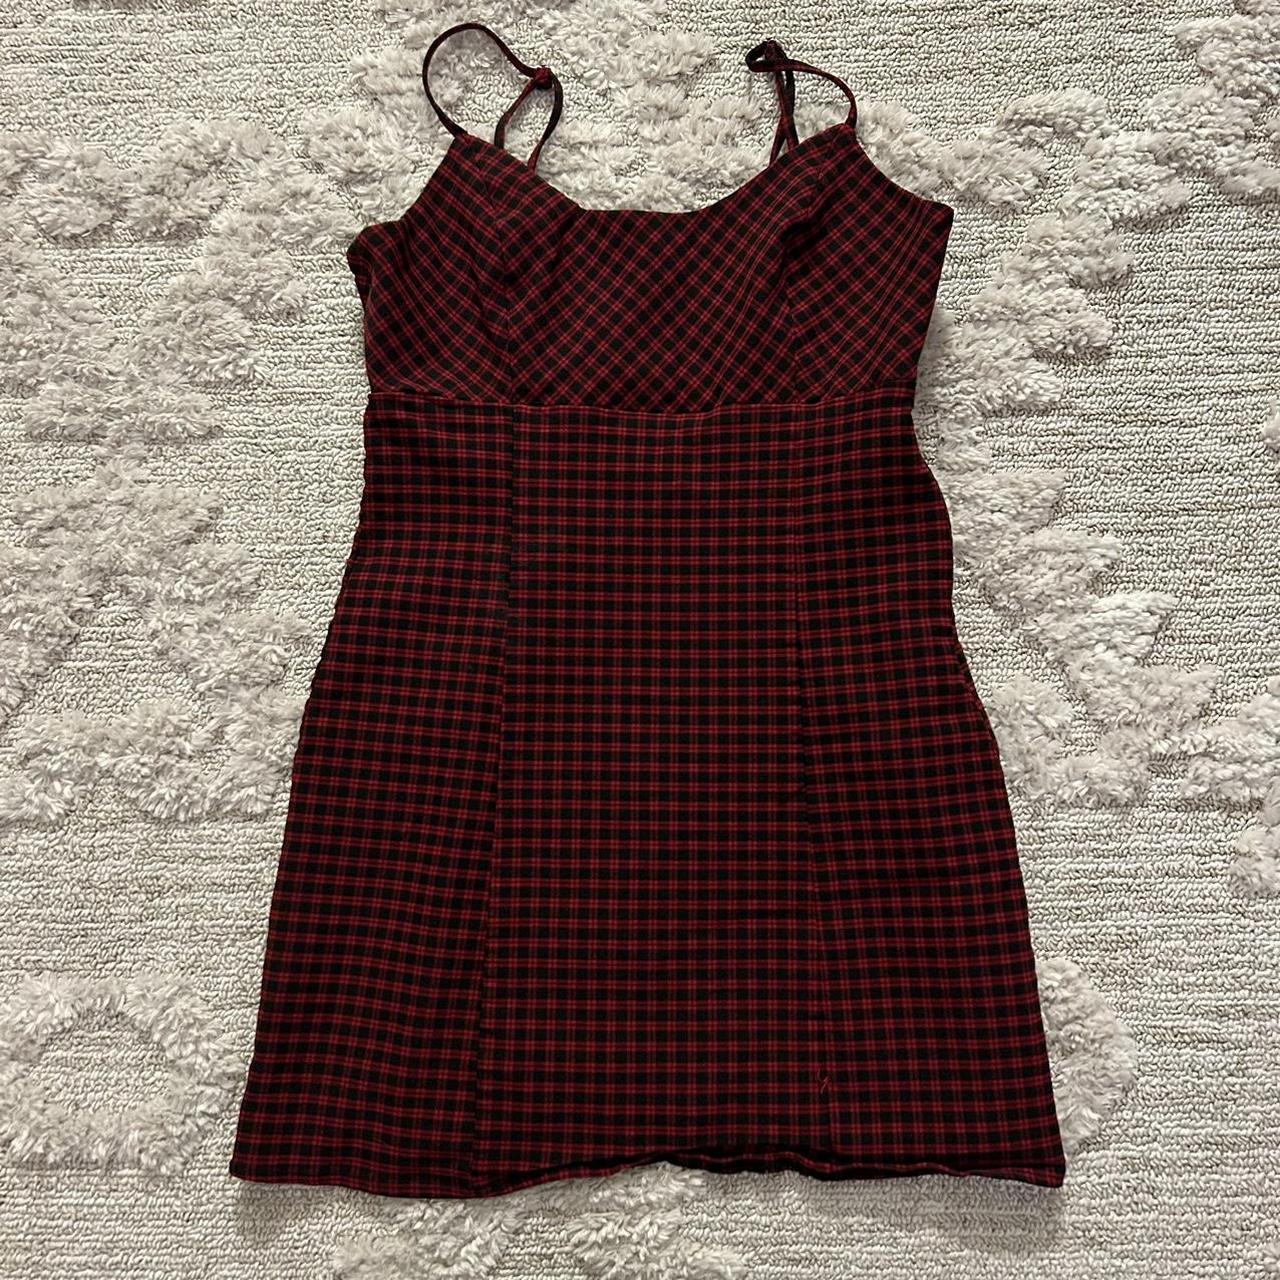 Forever 21 Women's Black and Red Dress